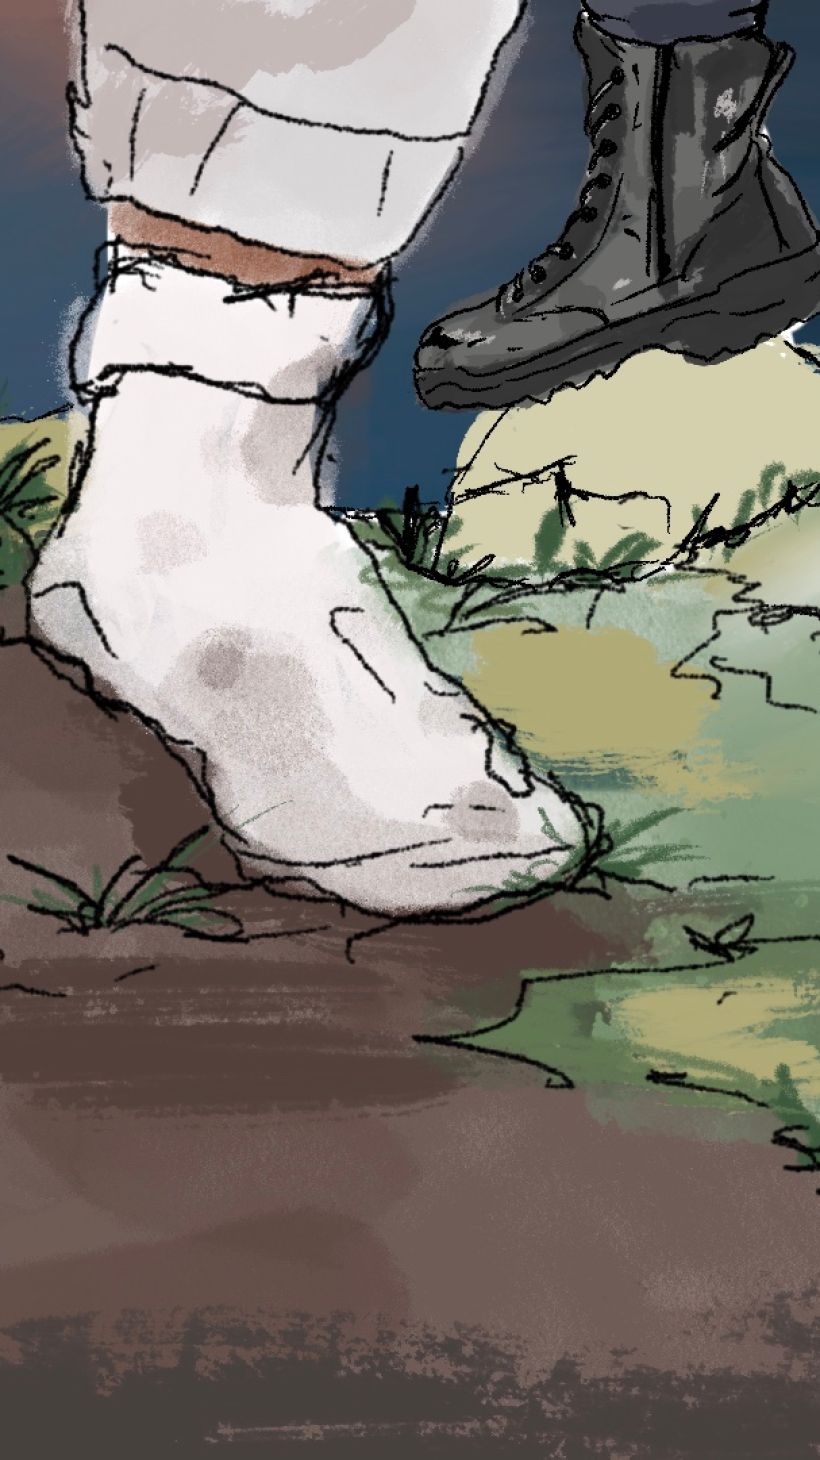 An illustration of a person who is a prisoner walking on grass and mud but with only their feet with muddy socks showing with two police officers with only their feet showing and their black boots, one on each side of the person with muddy socks in the middle.